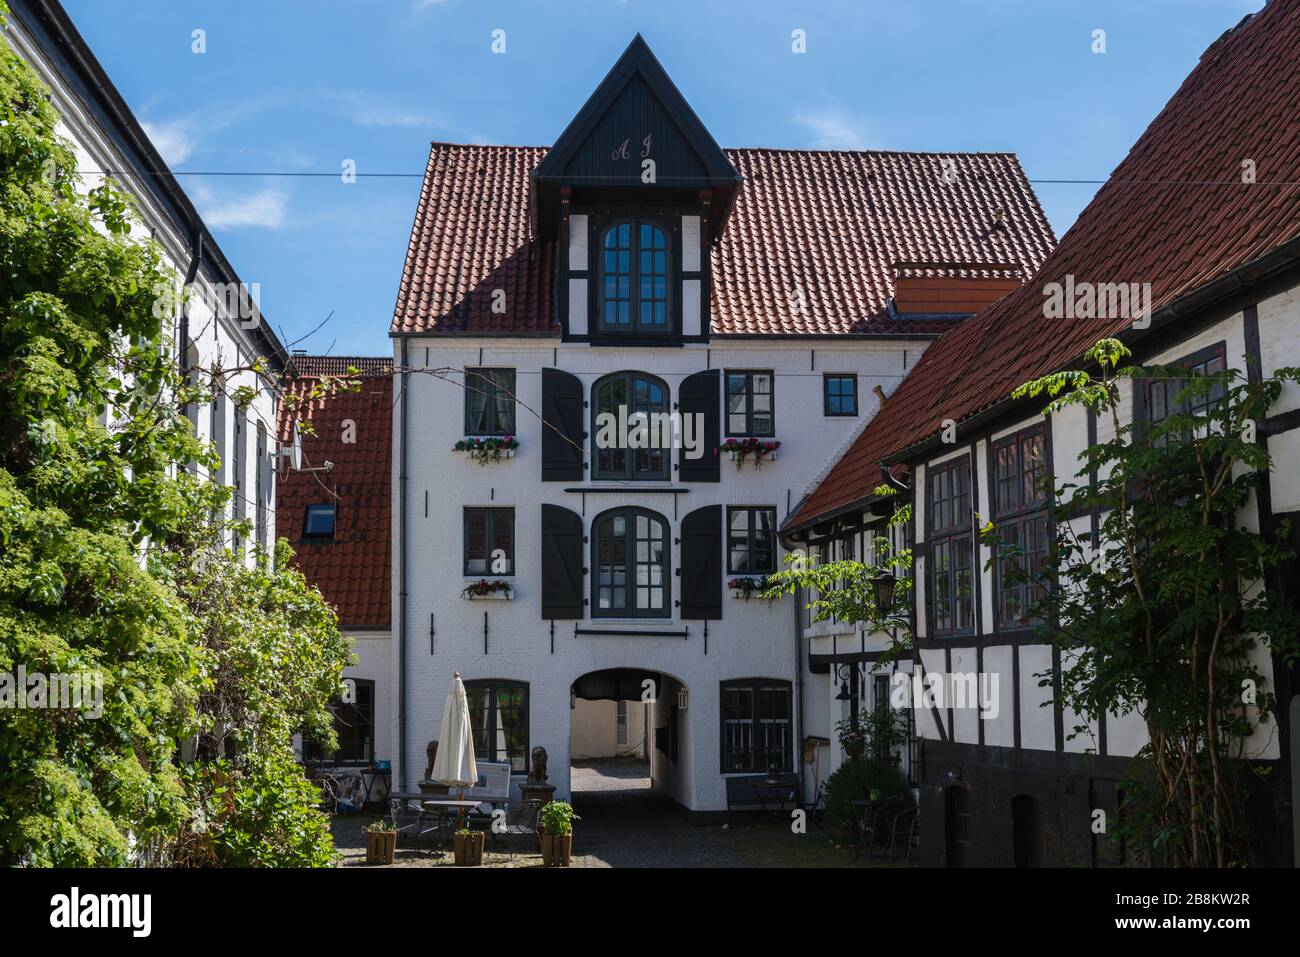 Historical back yard in the city of Flensburg on the Flenburg Fjord, border town to Denmark, Schleswig-Holstein, North Germany, Central Europe, Stock Photo